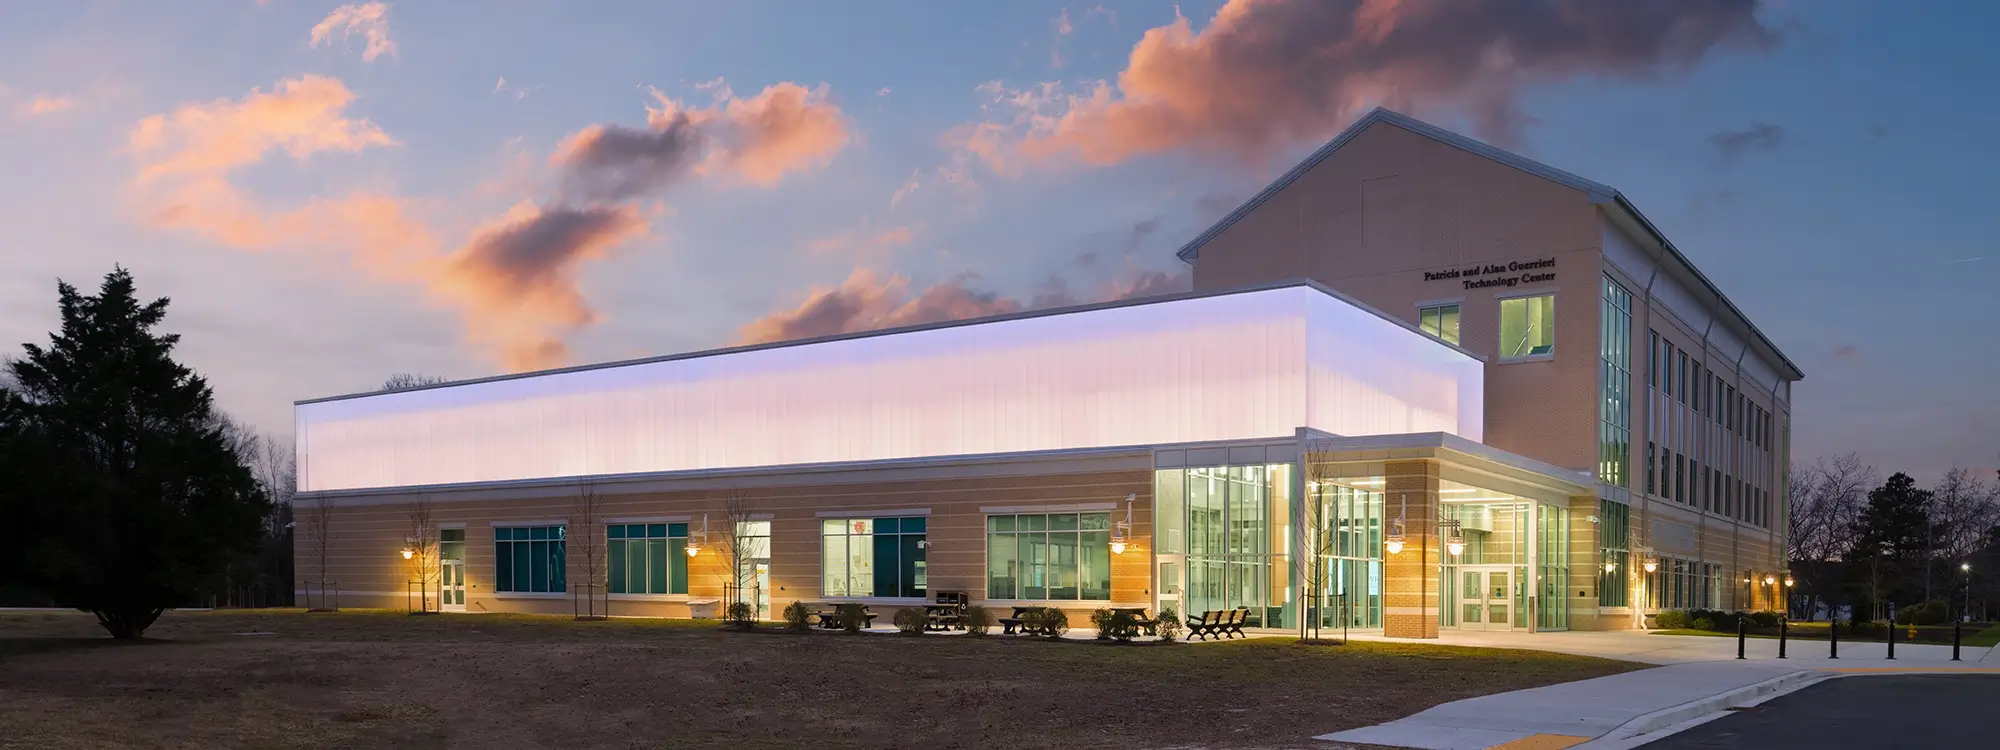 Polycarbonate Translucent Wall System at Wor-Wic Community College